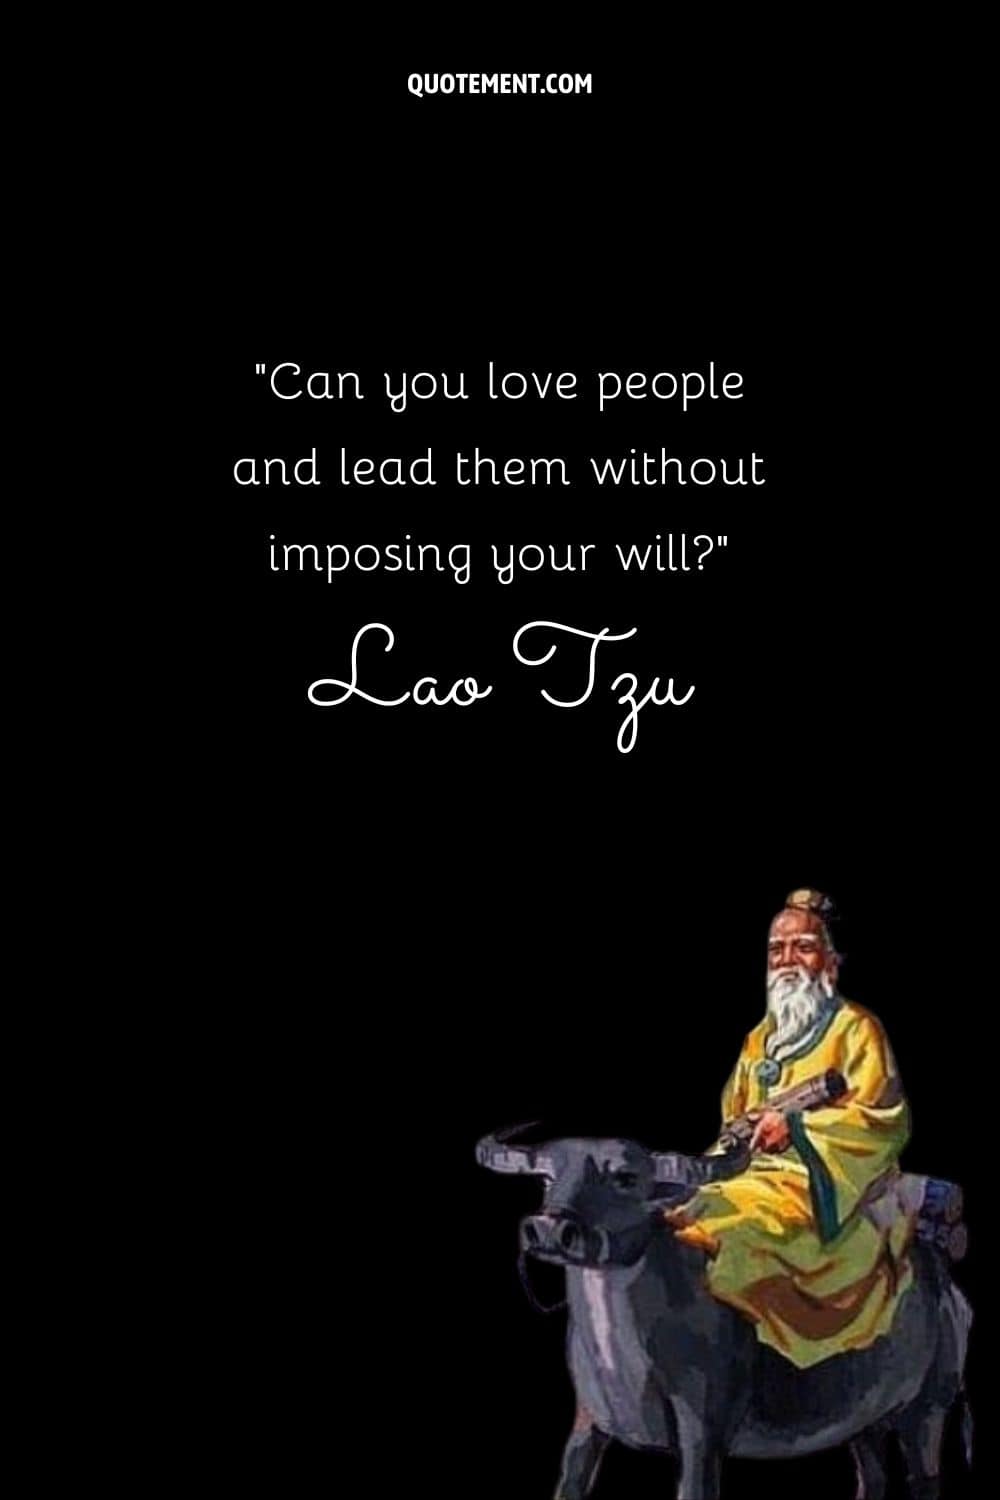 Can you love people and lead them without imposing your will